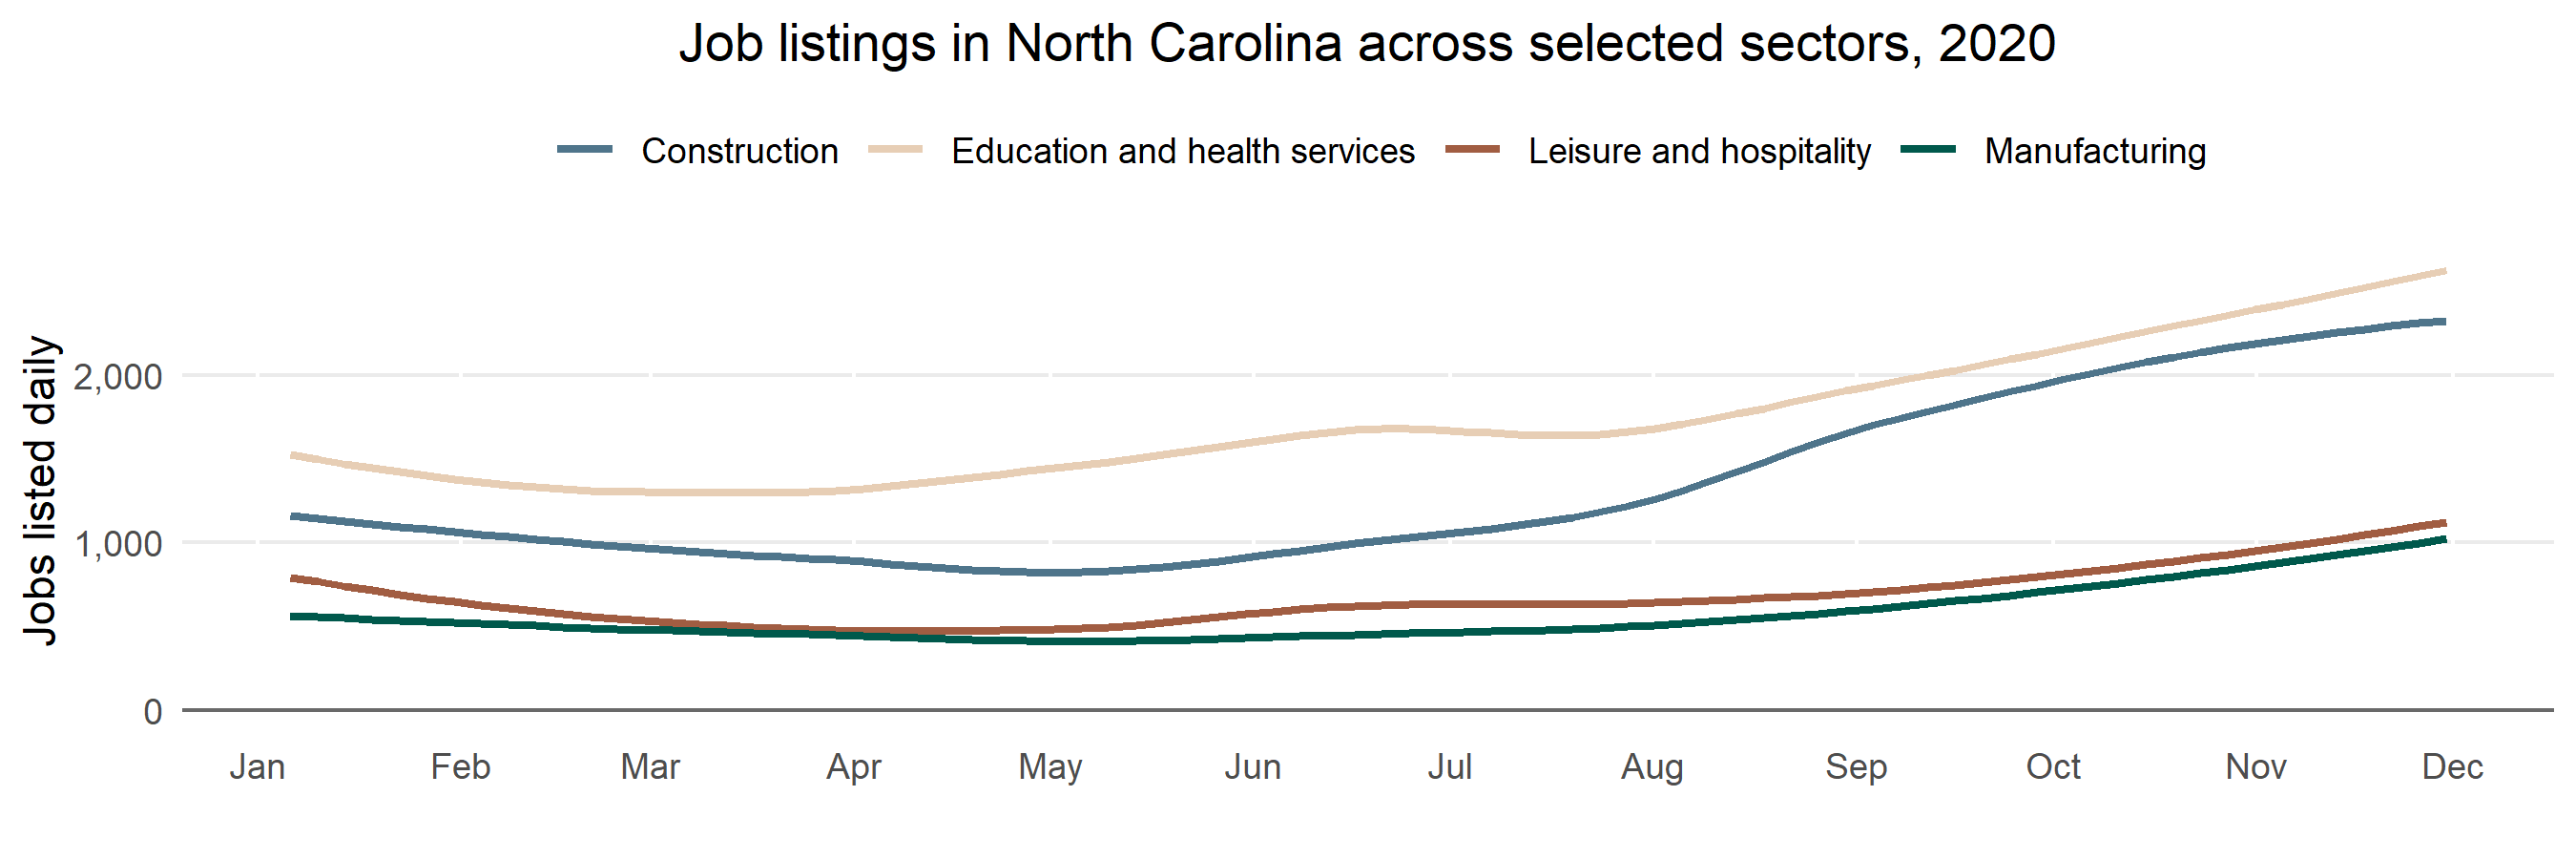 A multiple line chart showing change titled “Job listings in NC across various sectors.”  The y-axis represents number of job listings per week ranging from 0 to 2,000, and the x-axis is the date by month, ranging from January through October 2020. Education and health services had the highest percentage at any given period.  It is followed by construction and professional and business services. Public administration declined from January through September, and then jutted up in October. Leisure and hospitality wavered throughout the year, but began trending upwards in July. Information, natural resources and mining and other services were relatively stable.